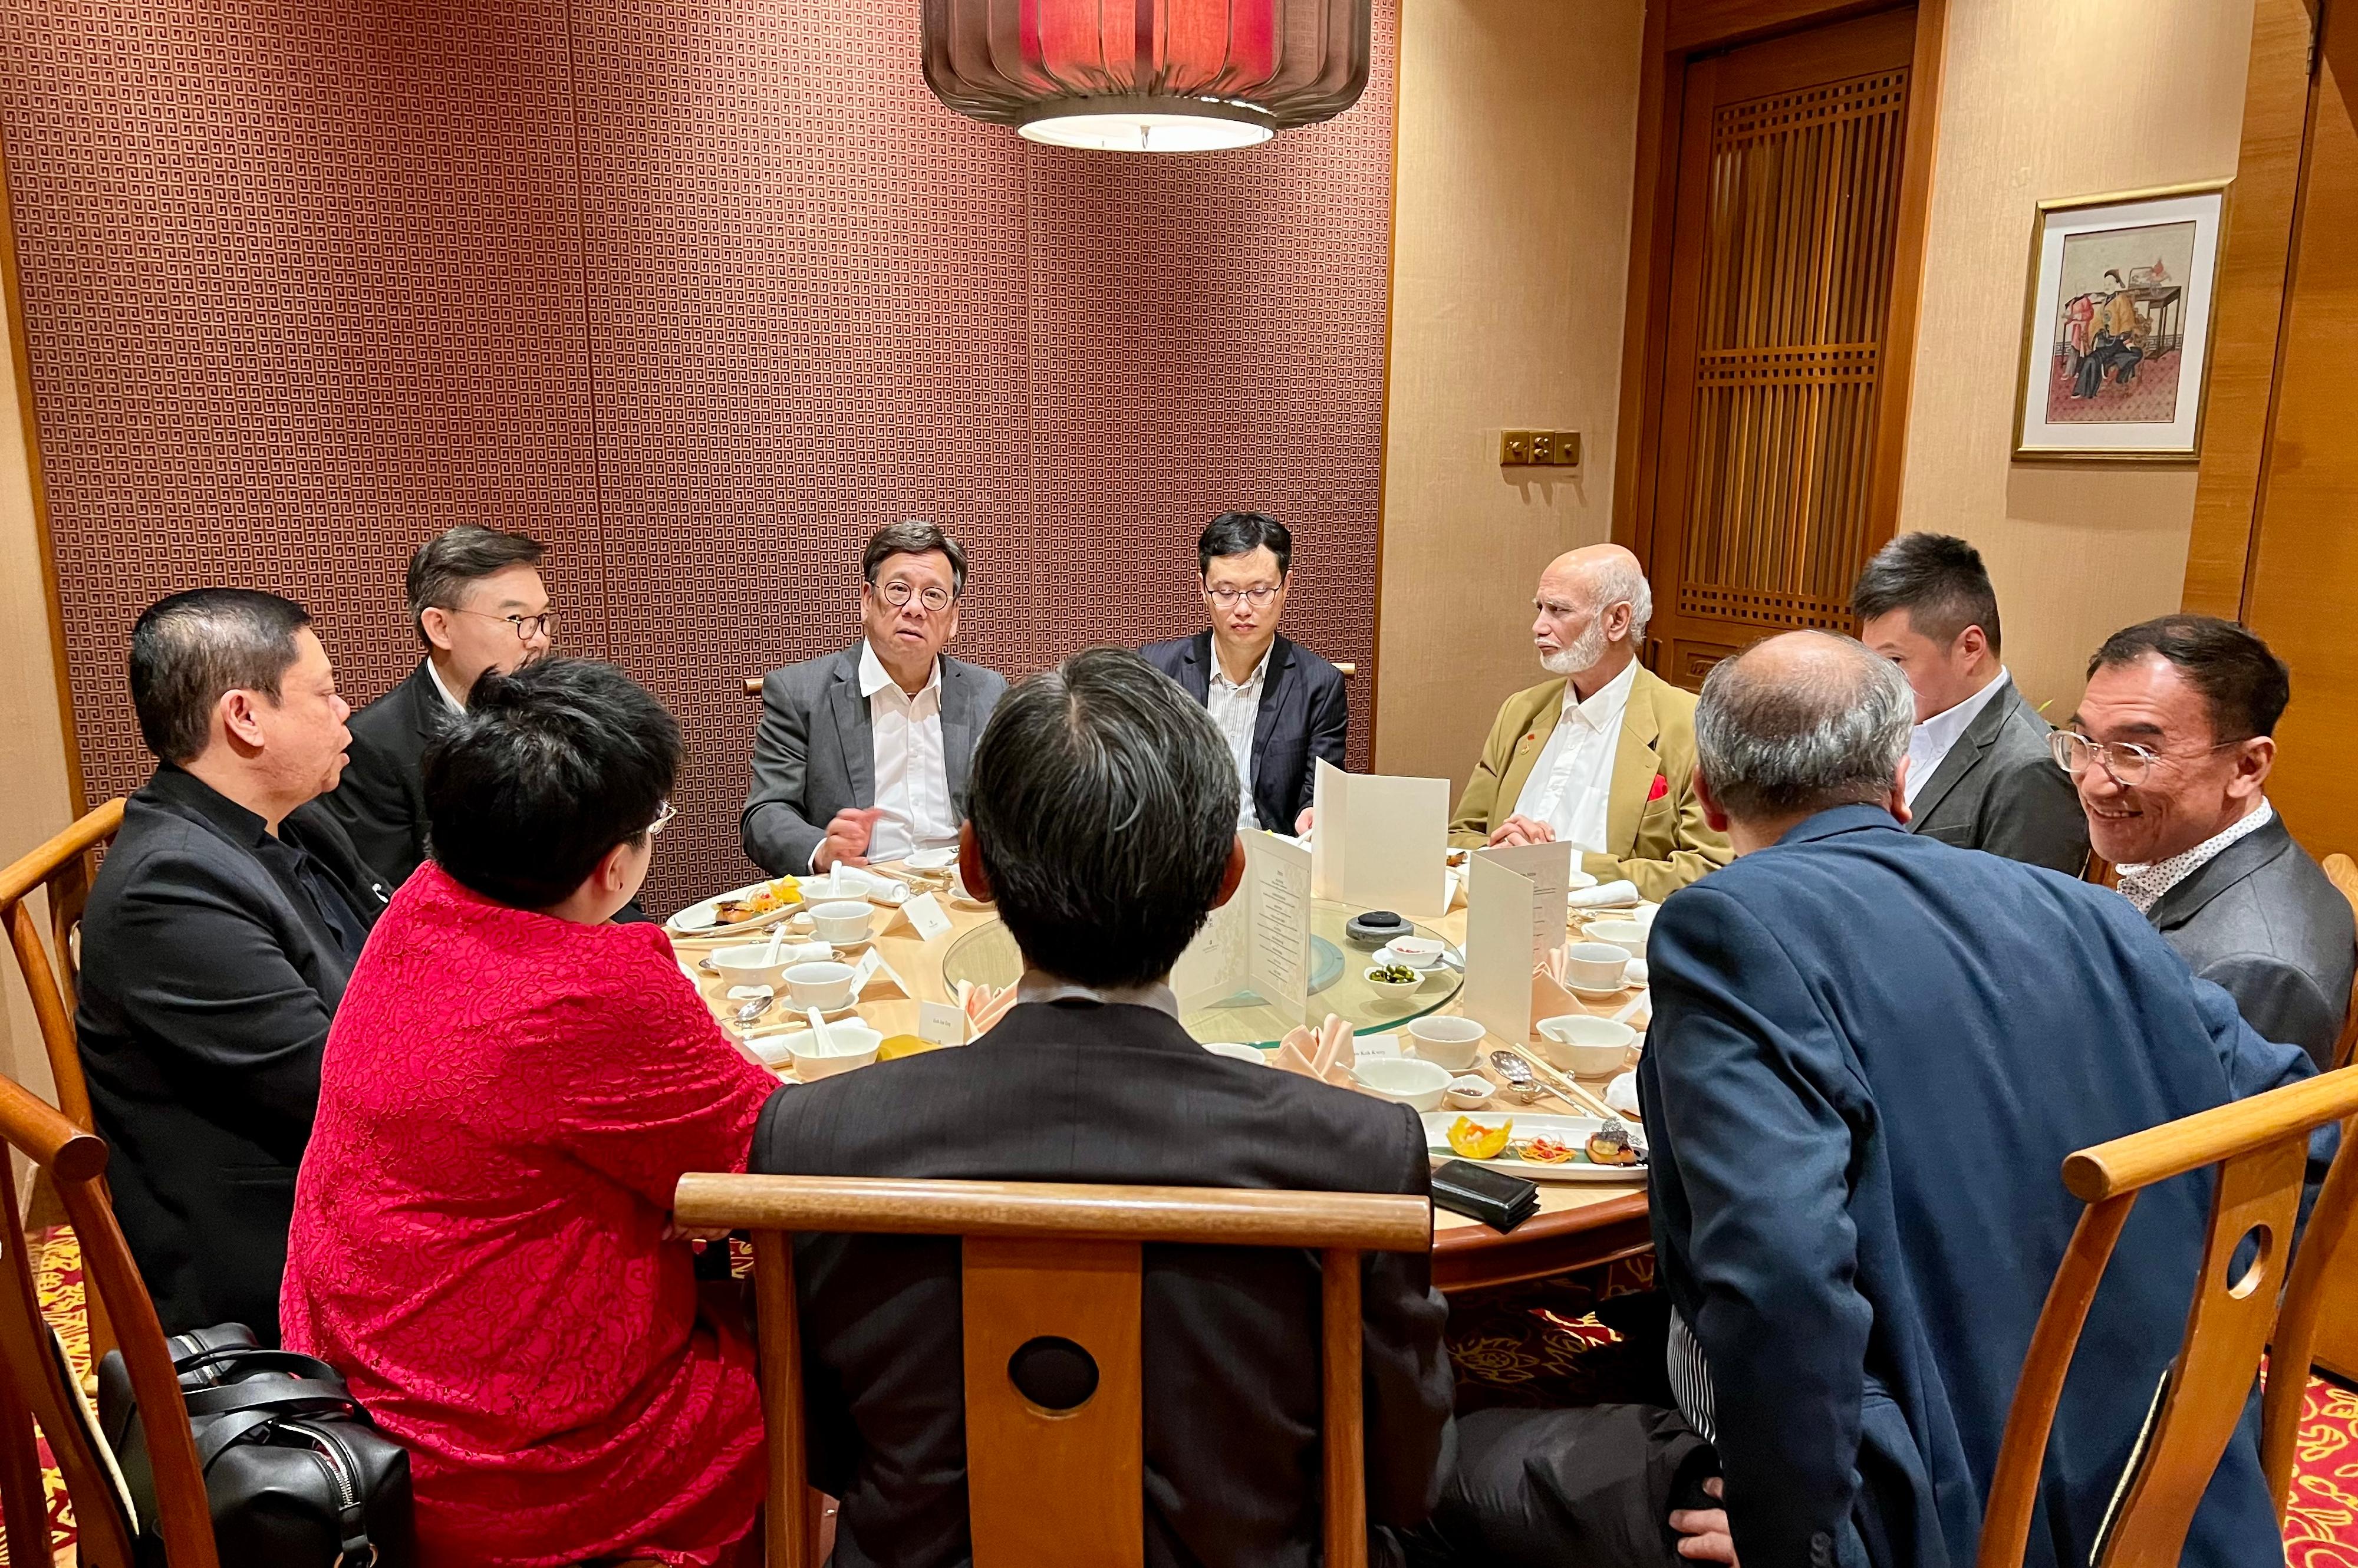 The Secretary for Commerce and Economic Development, Mr Algernon Yau (third left), hosts a dinner for members of the Hong Kong - Malaysia Business Association in Kuala Lumpur, Malaysia, today (September 21) to exchange views on trade and business co-operation, and the opportunities brought about by the Guangdong-Hong Kong-Macao Greater Bay Area development.